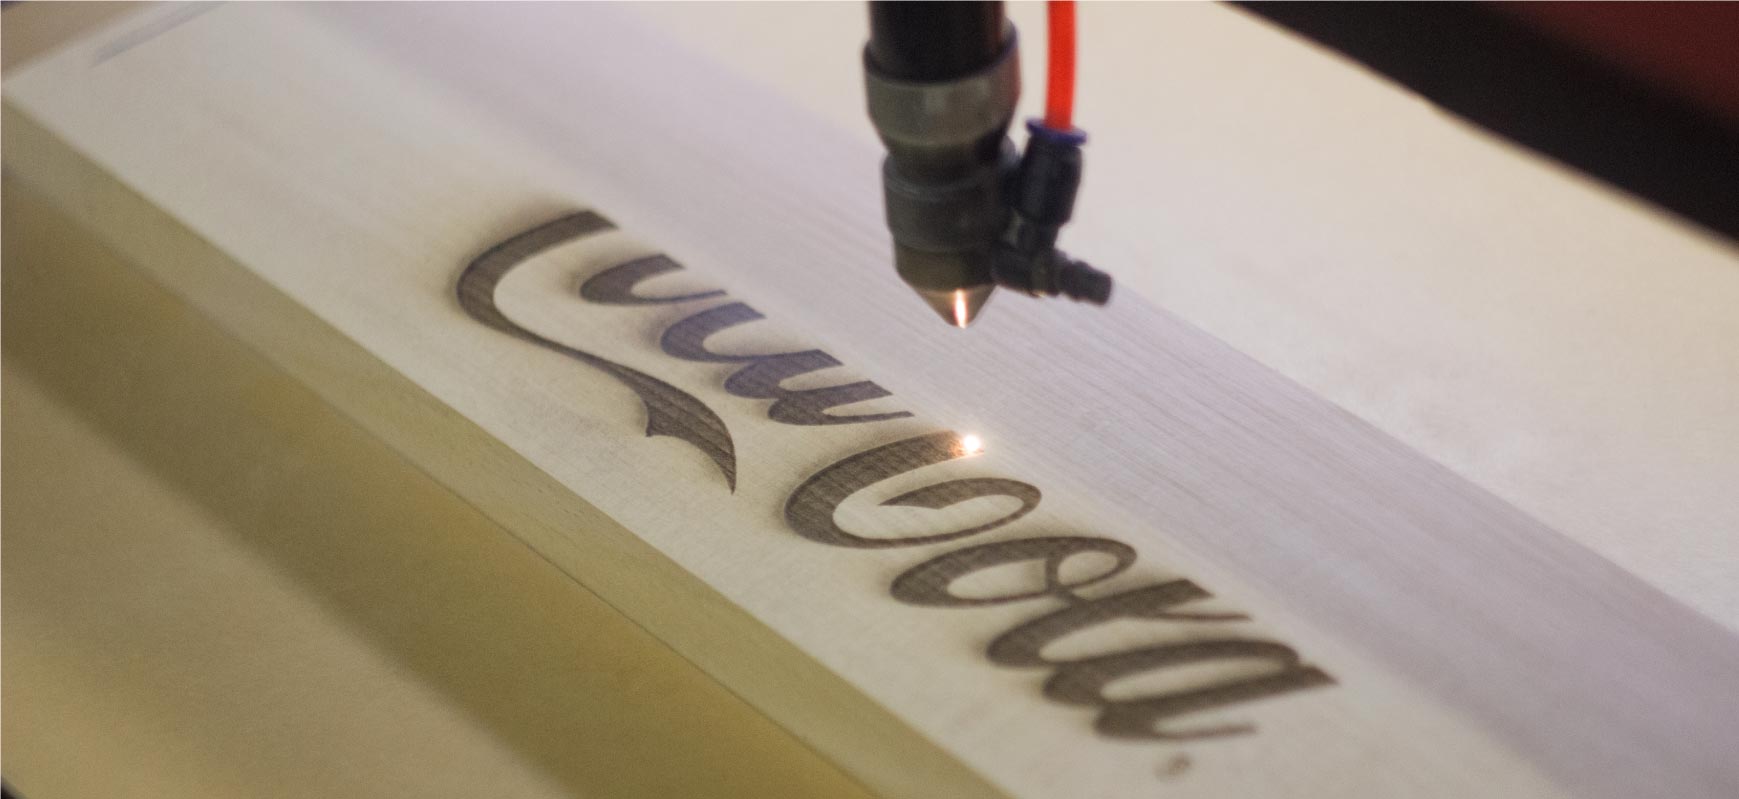 Coca-Cola laser engraving process on a wooden plank using an accurate and focused laser beam